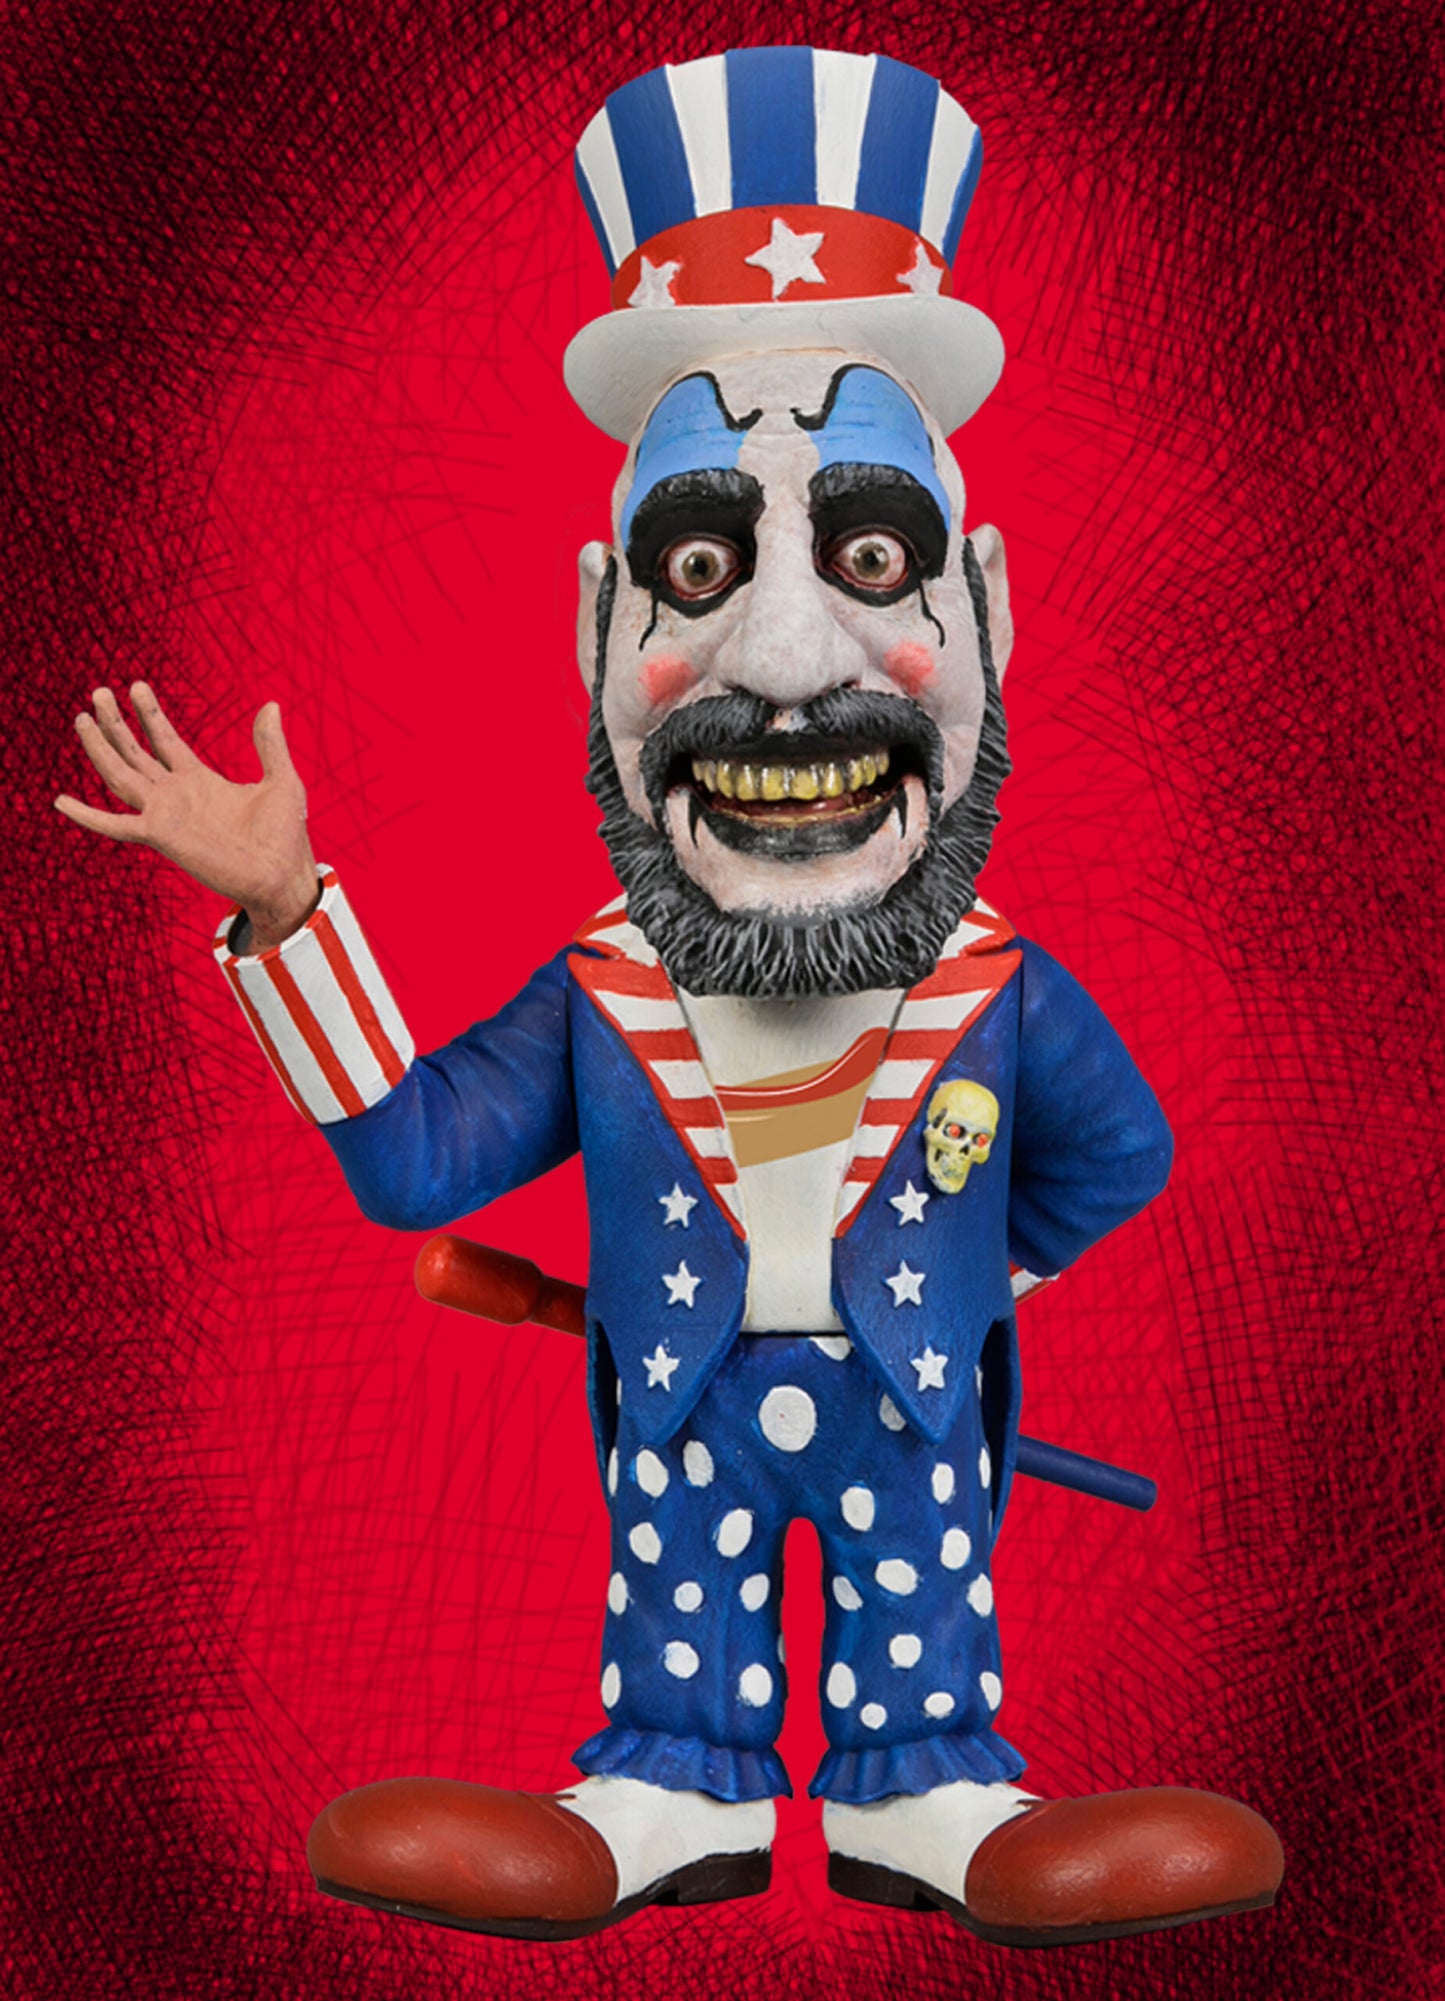 House of 1000 Corpses – 20th Anniversary Stylized Figures – Little Big Head 3pk